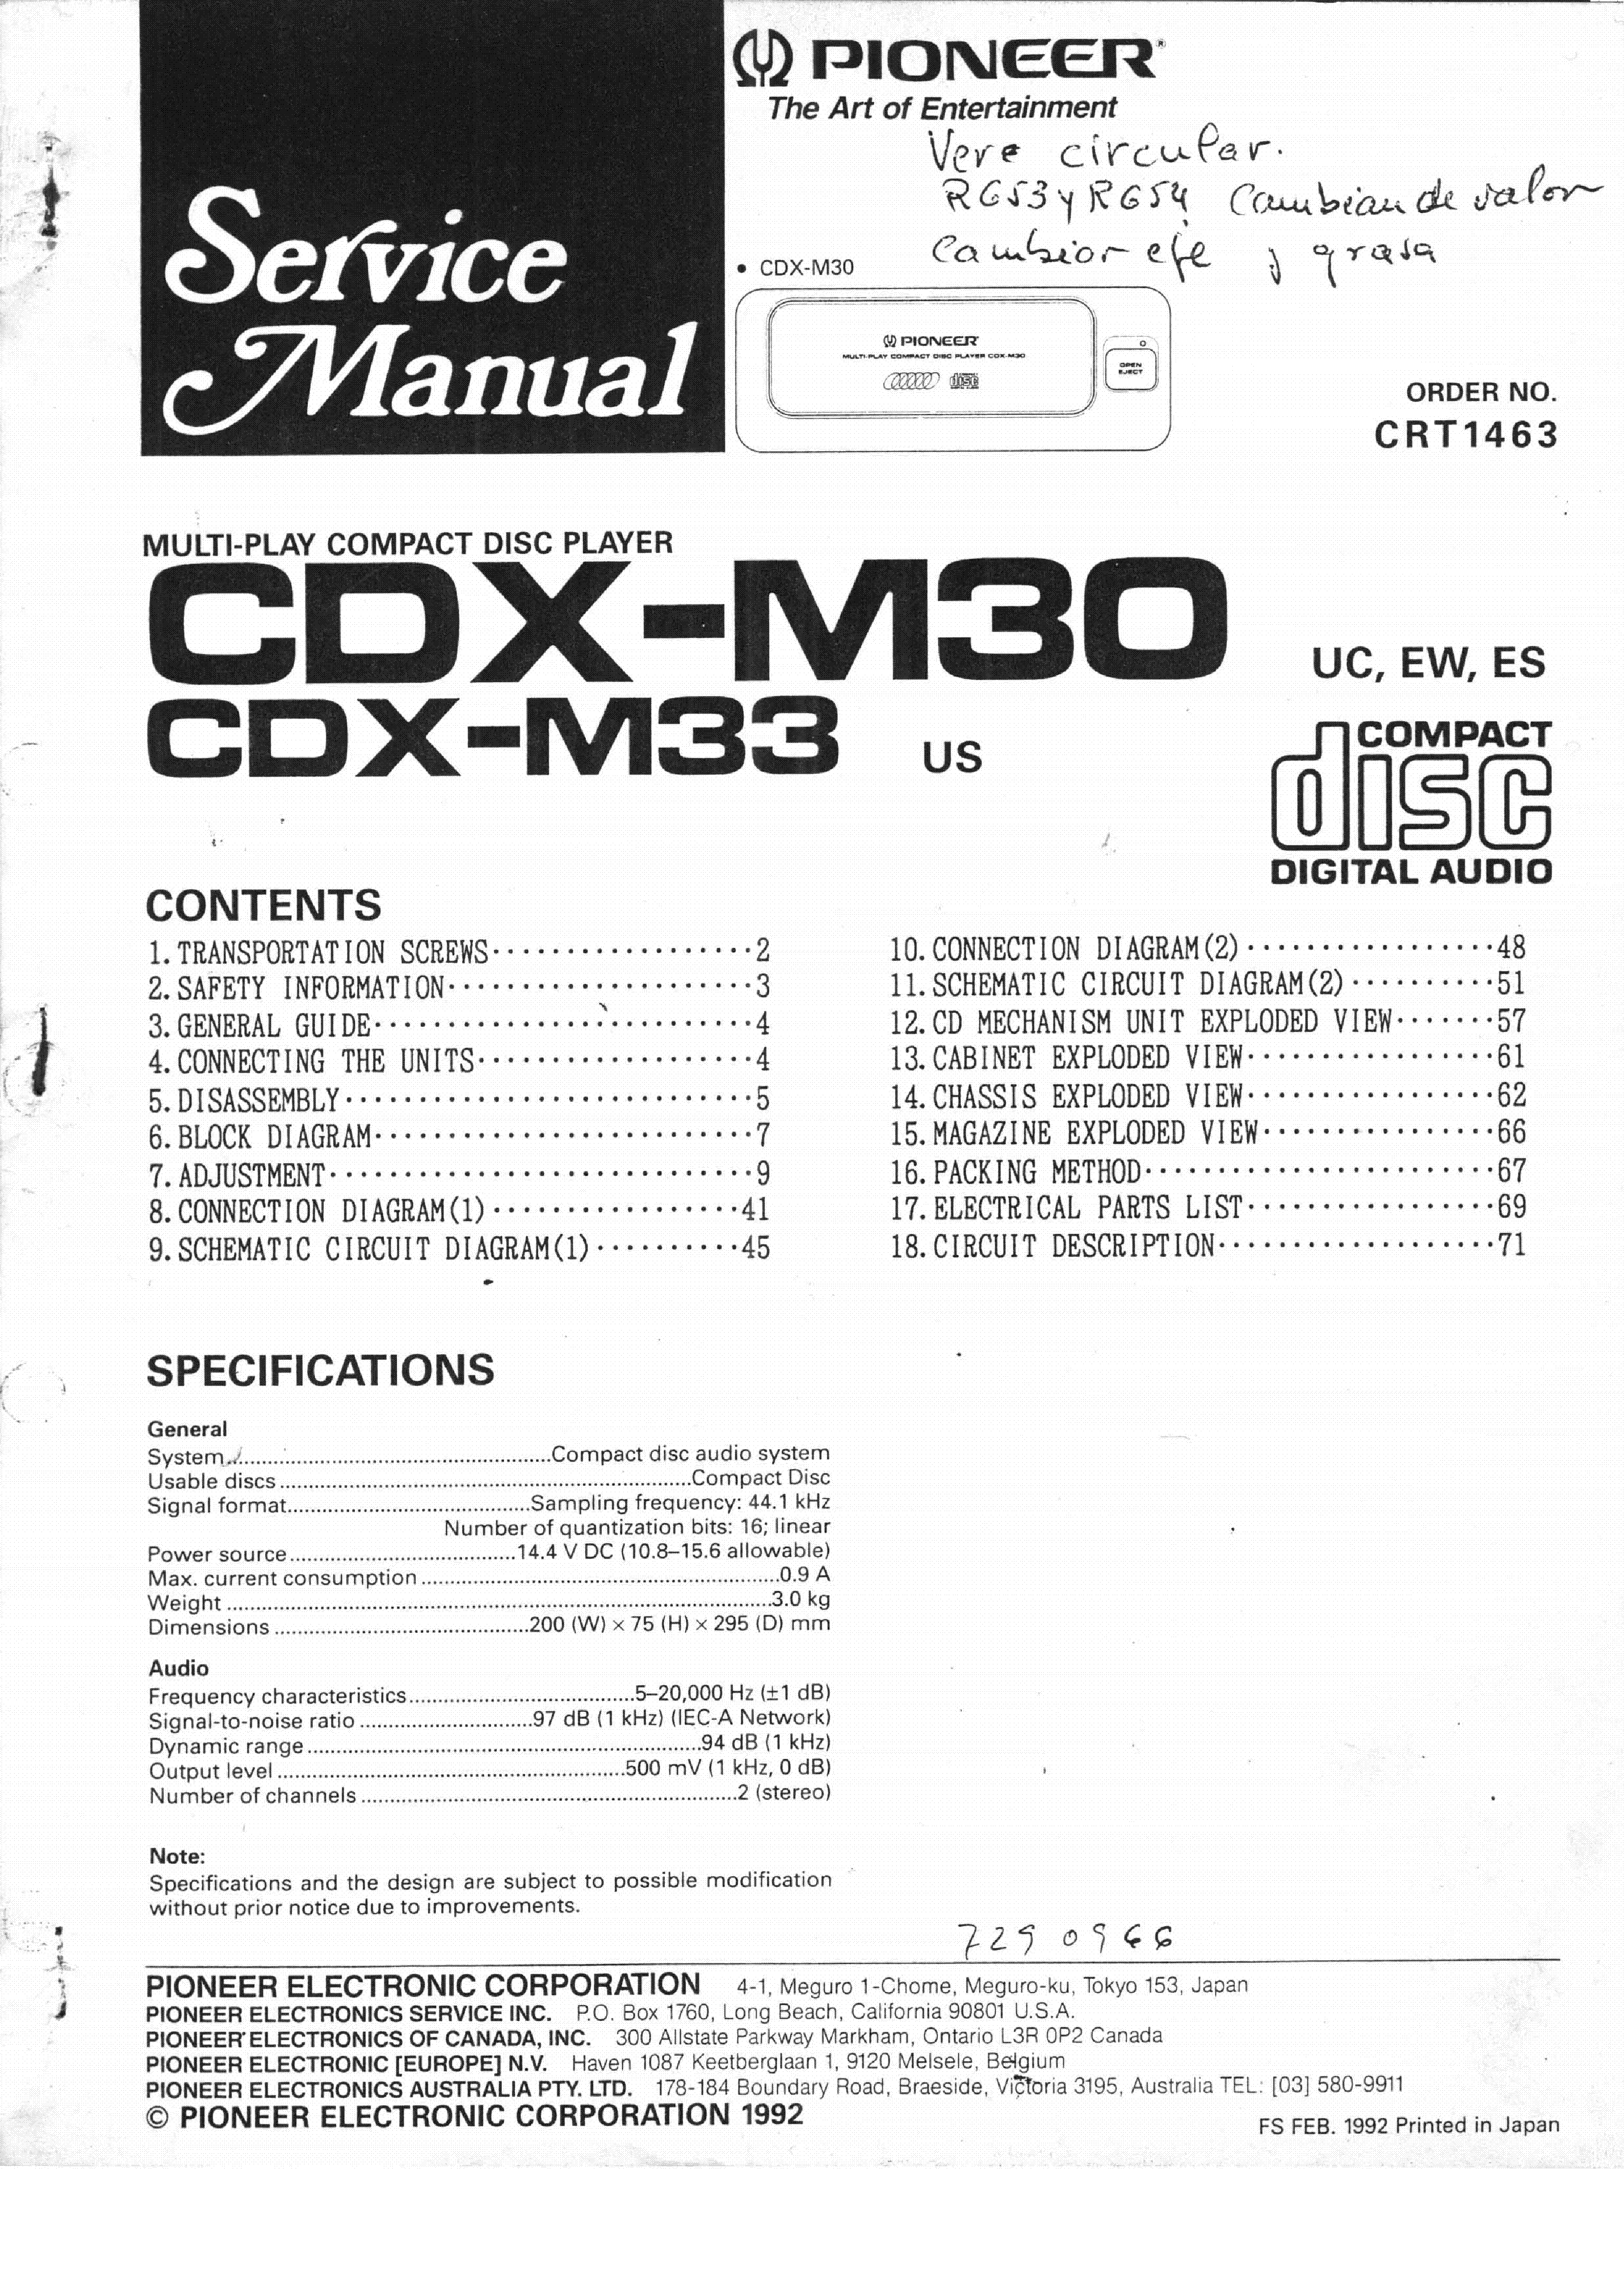 PIONEER CDX-M-30-33 service manual (1st page)